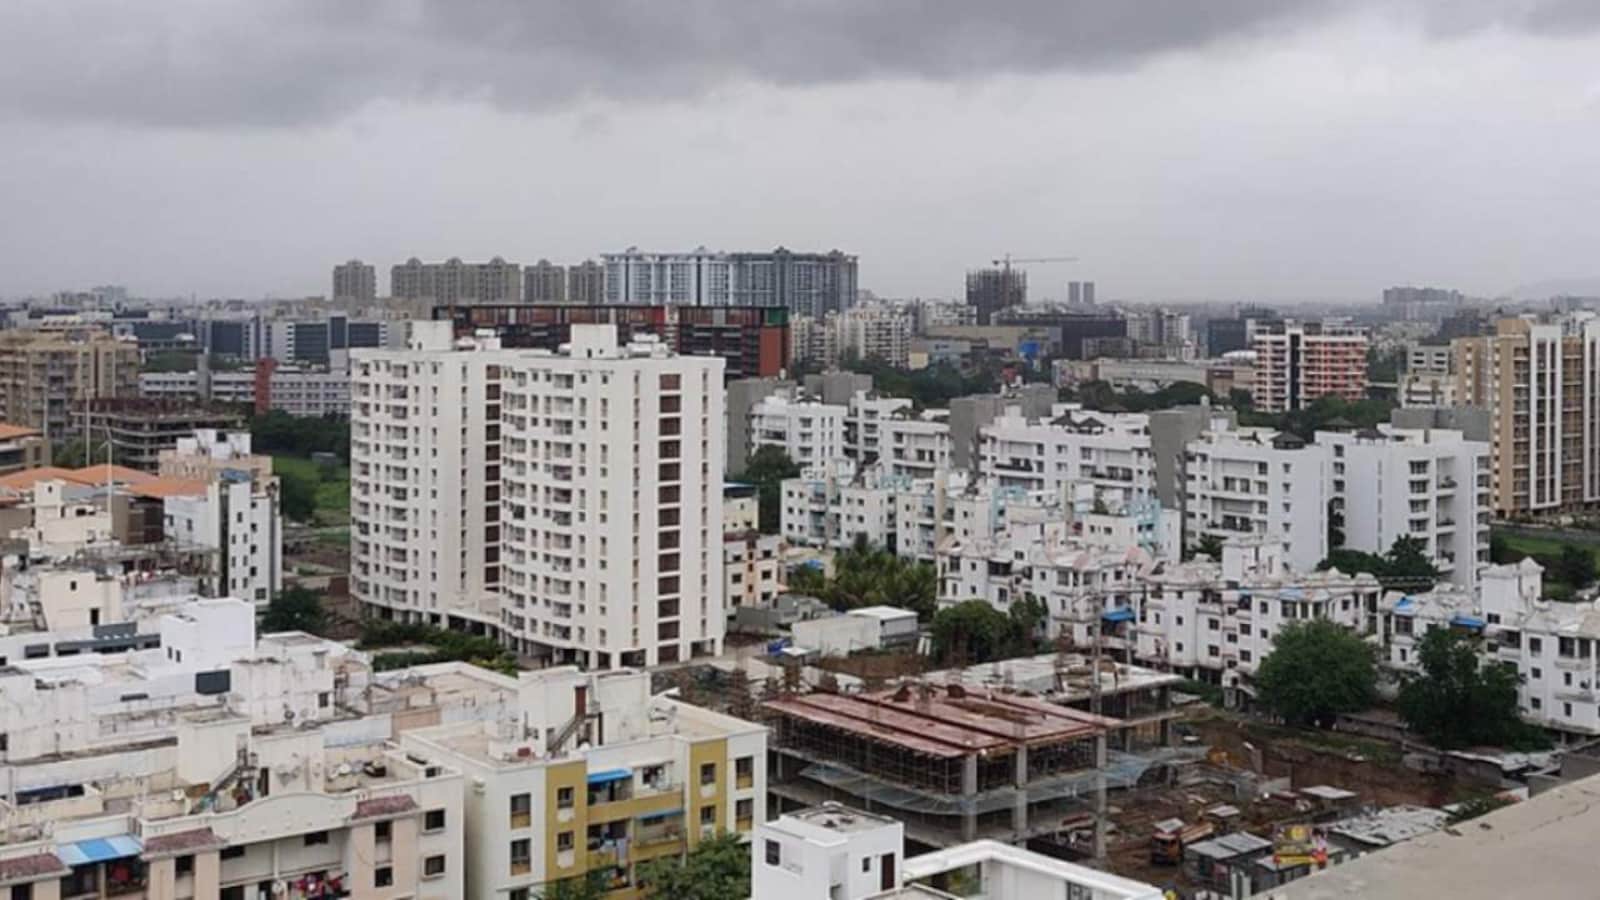 CHENNAI REAL ESTATE MARKET SHOWS SIGNS OF RECOVERY